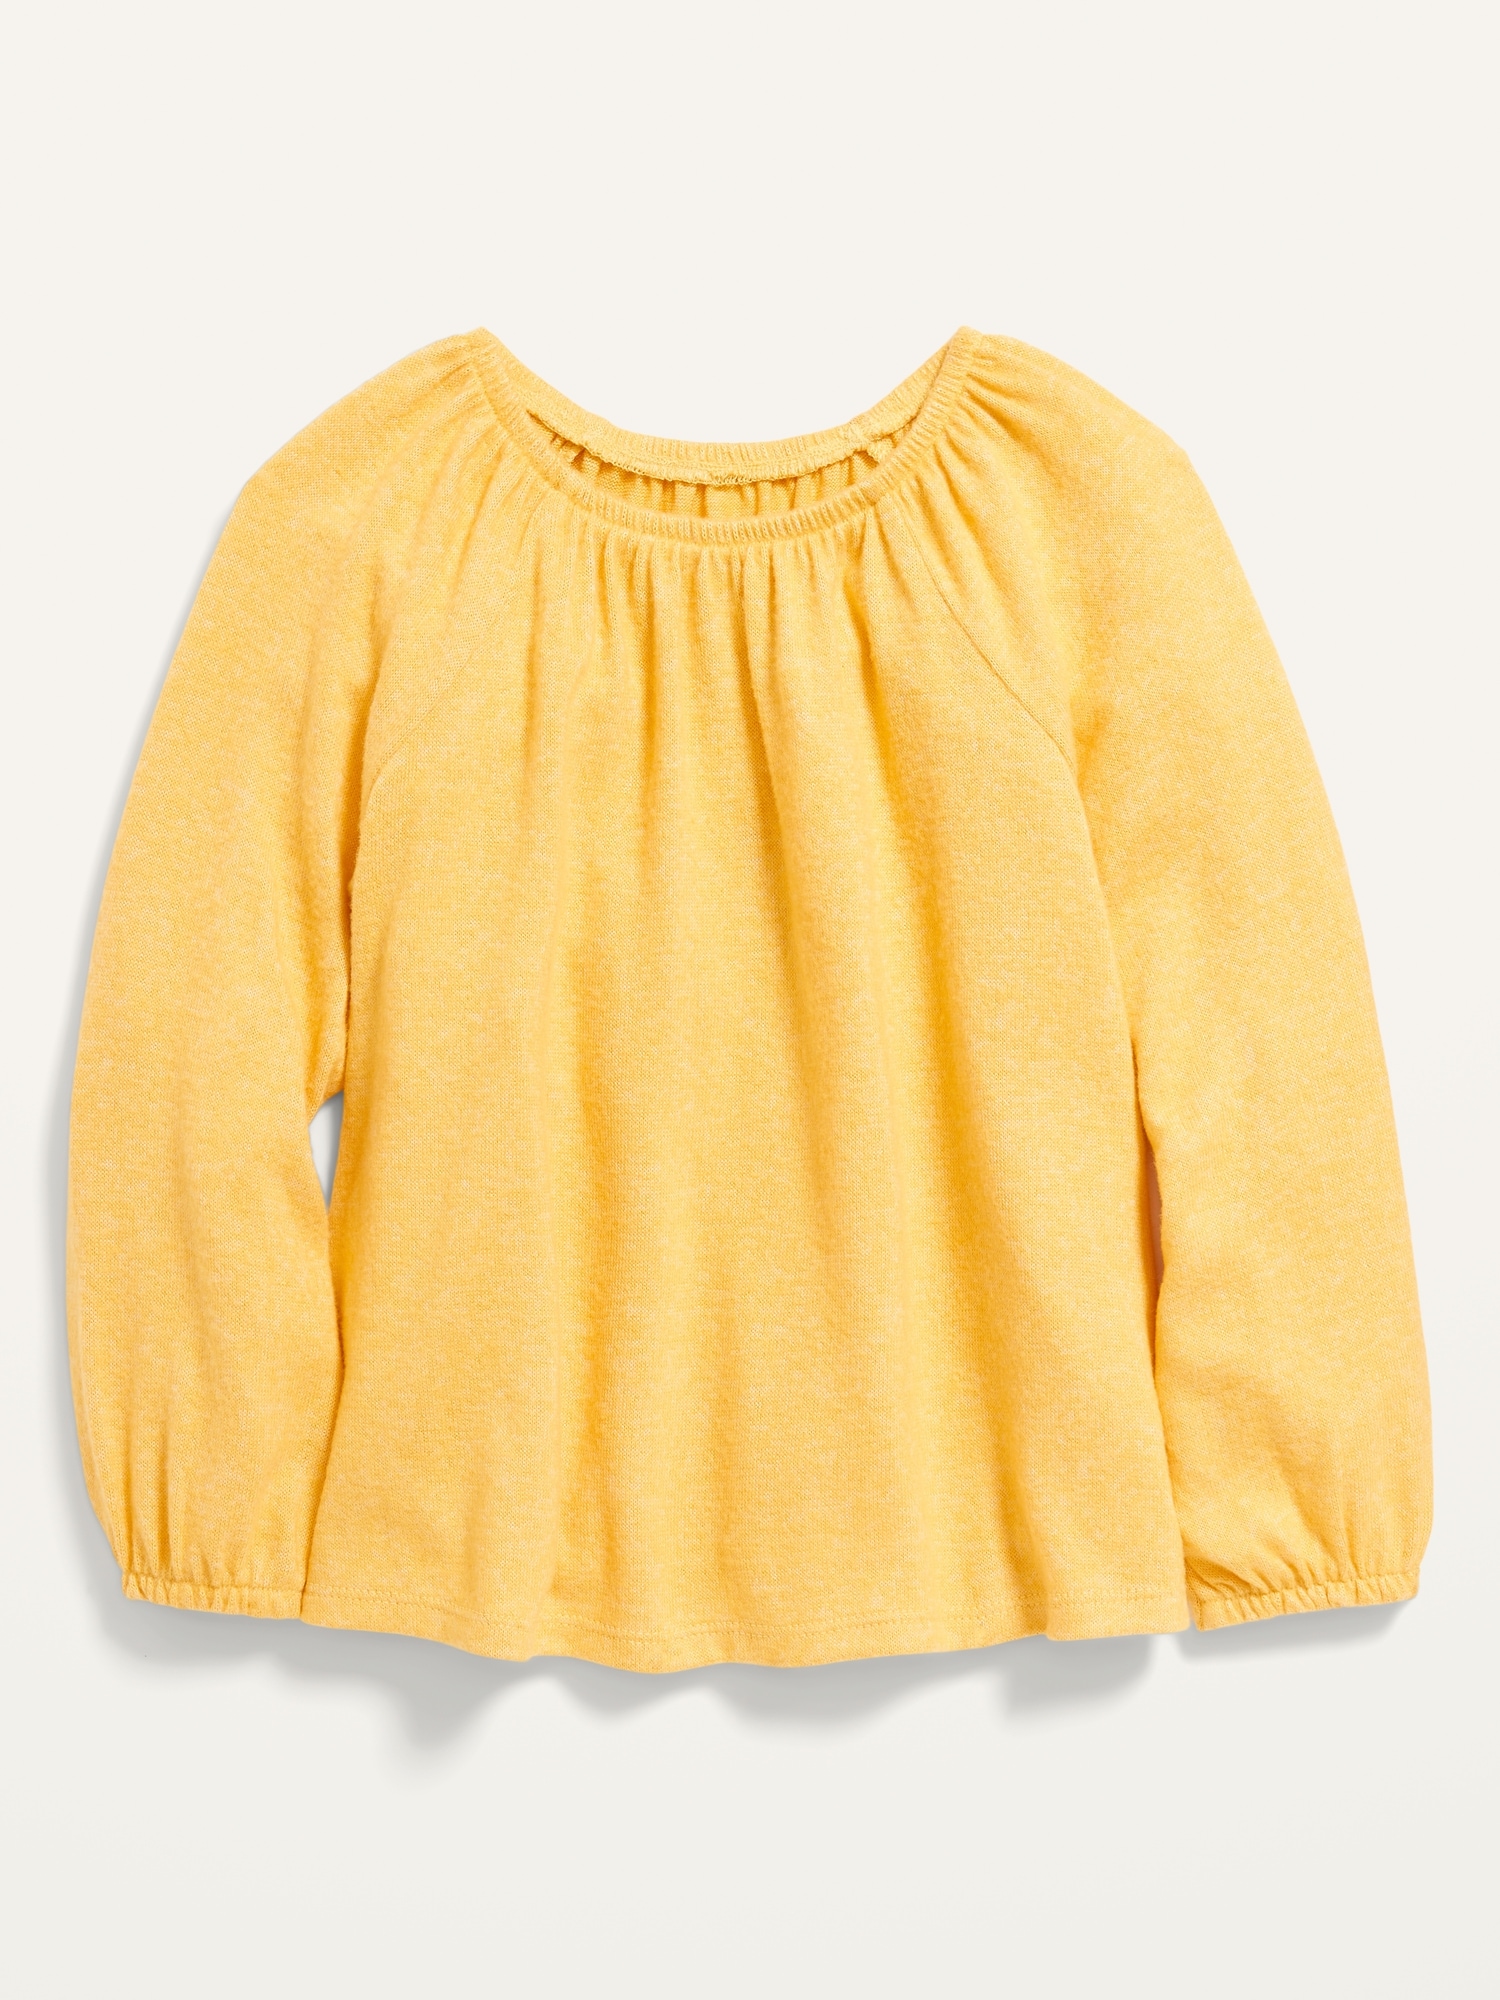 Cozy Long-Sleeve Top for Toddler Girls